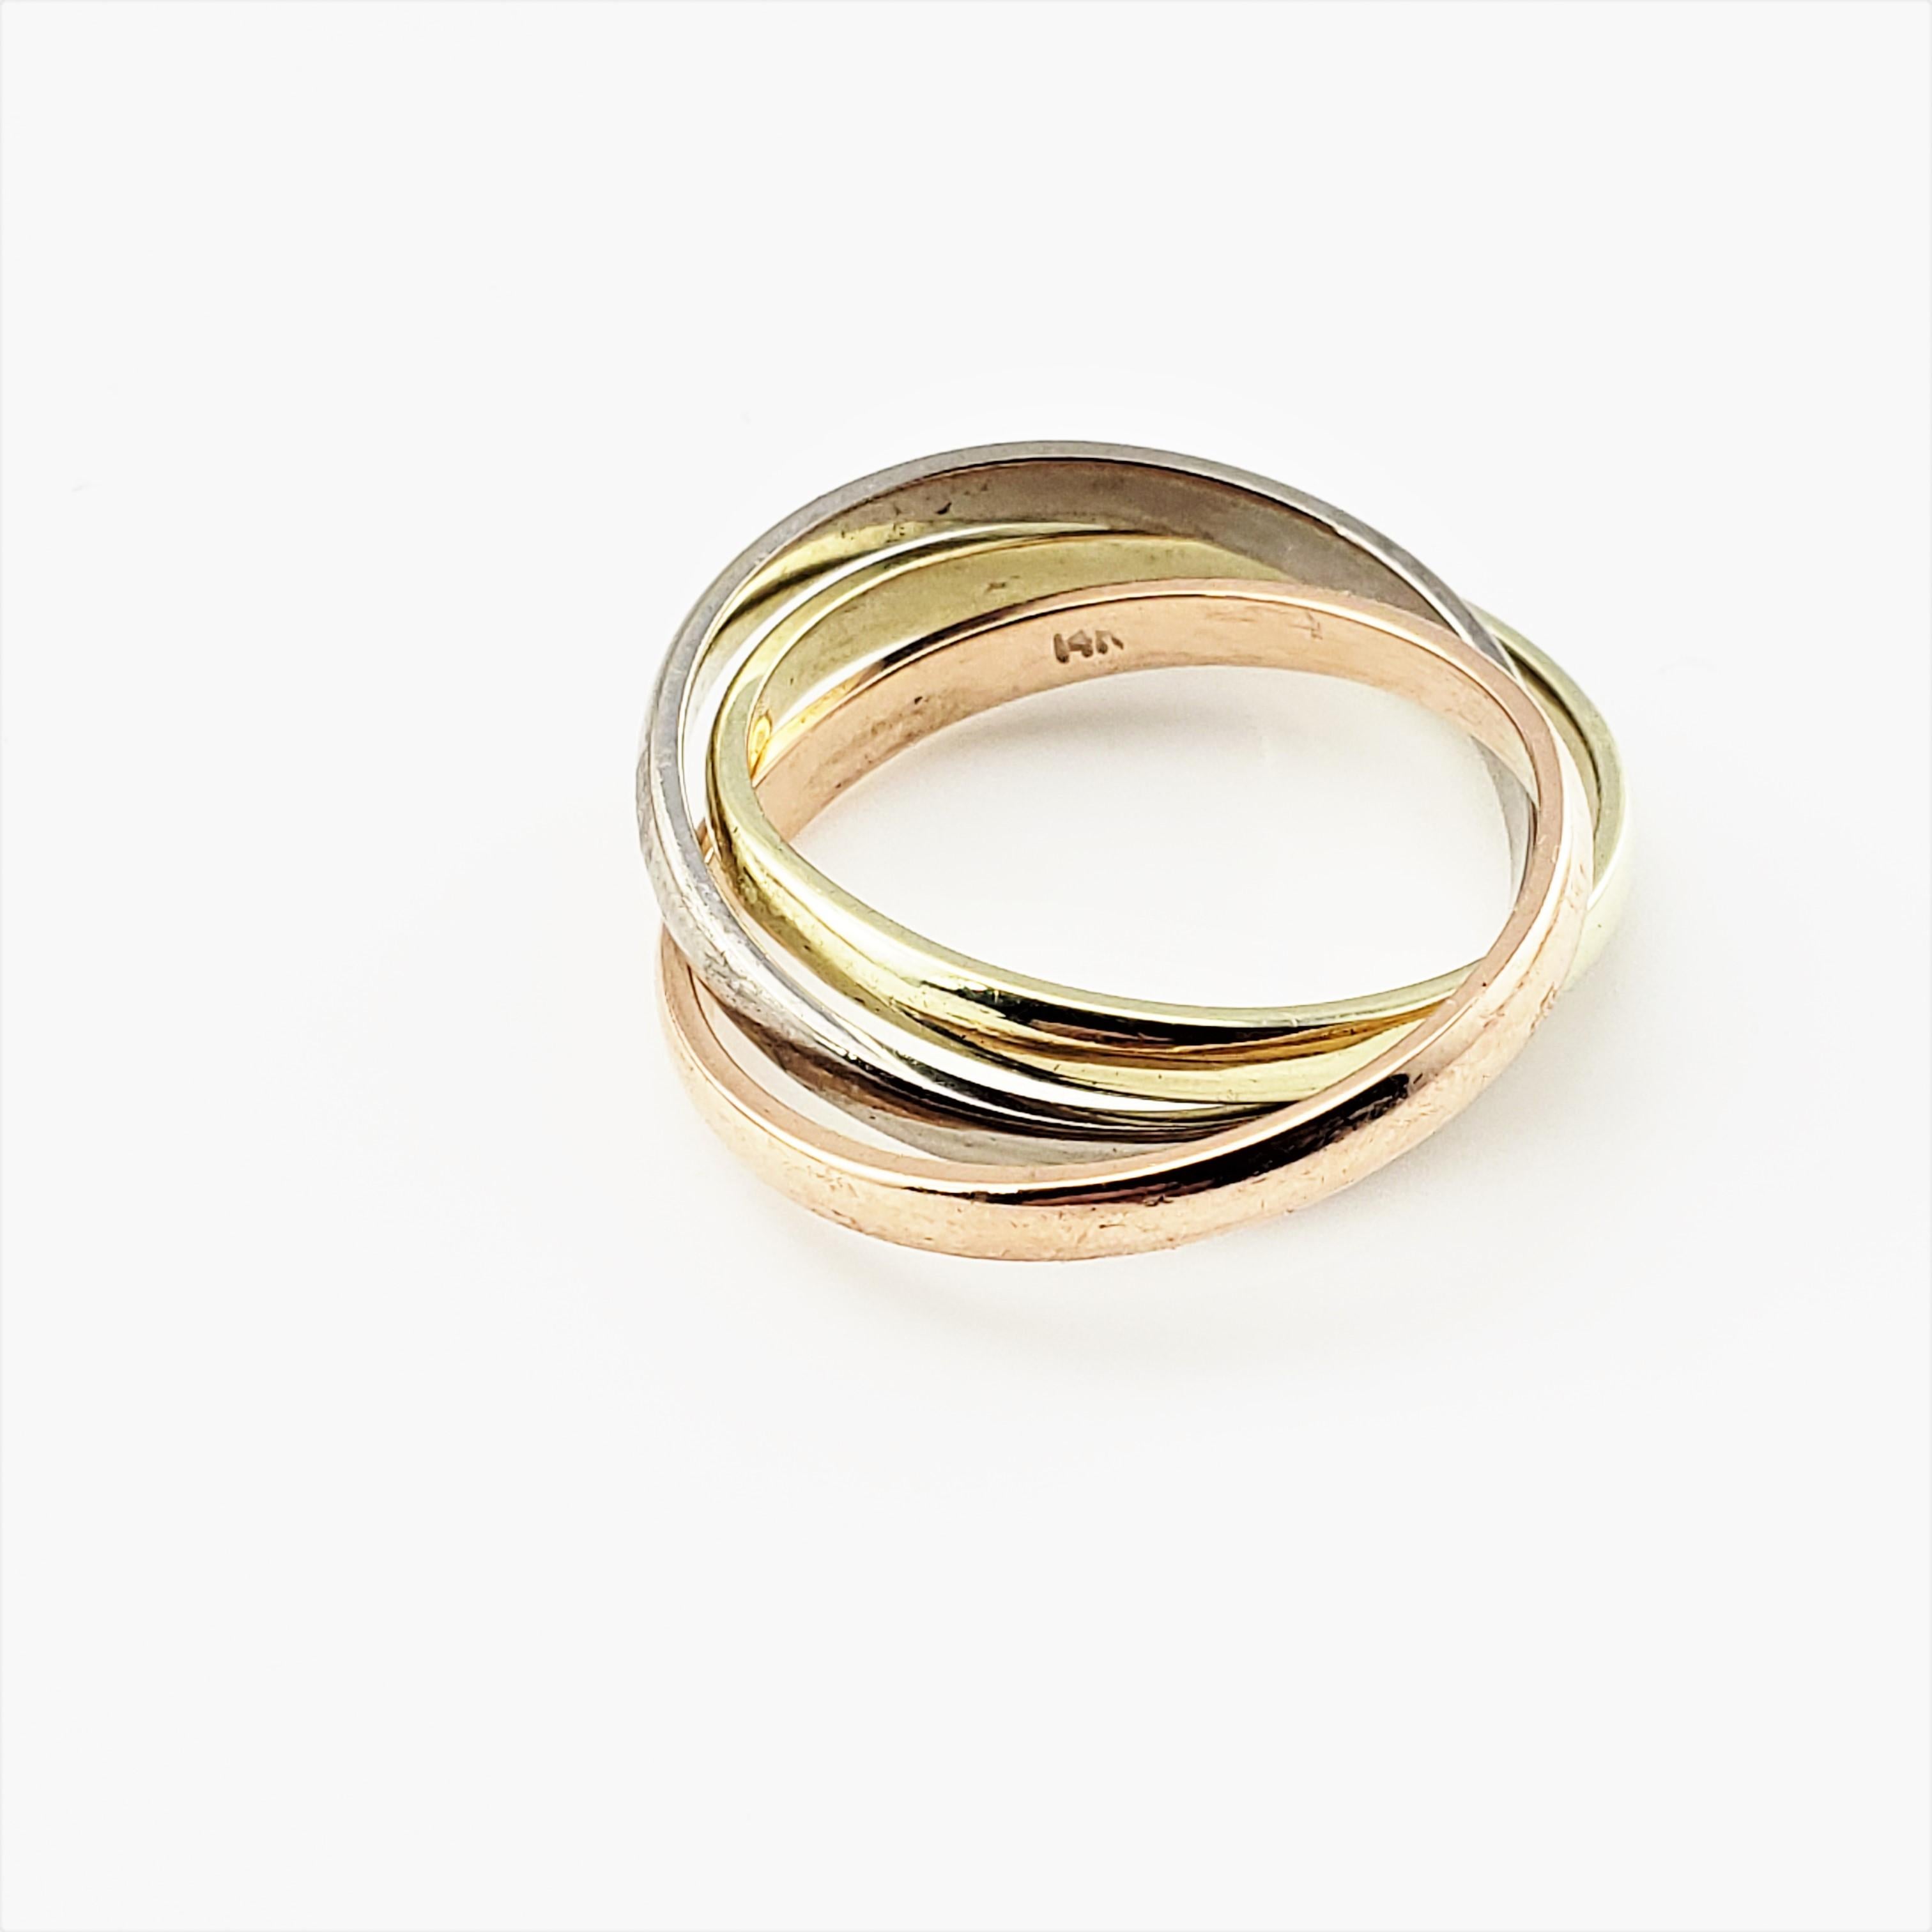 Vintage 14 Karat Yellow, White and Rose Gold Three Band Rolling Ring Size 6.25-

This lovely ring features three interlocking unfixed bands in elegant 14K yellow, rose, and white gold.  Width:  2 mm each band.

Size: 6.25

Weight:  2.8 dwt. /  4.5